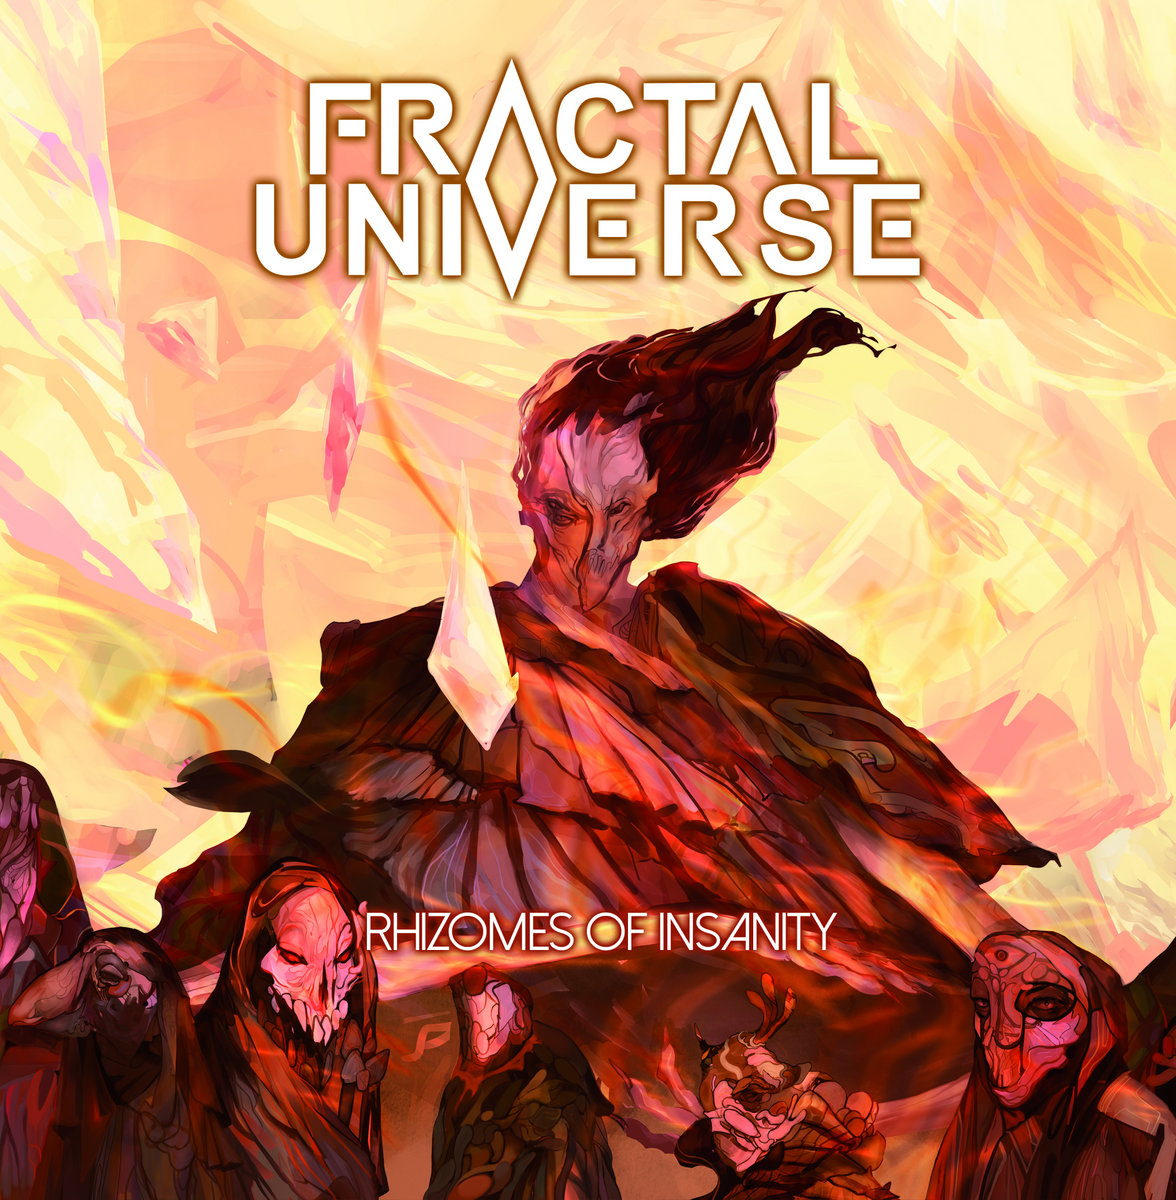 Fractal Universe Tech/Prog Death ML: <3000My Fav Album: Rhizomes of InsanityFractal ticks my technical wankery box that I've had since discovering PTH. Solid tech progressive with strong use of synths but right now they are just 'good' and not really pushing the envelope.